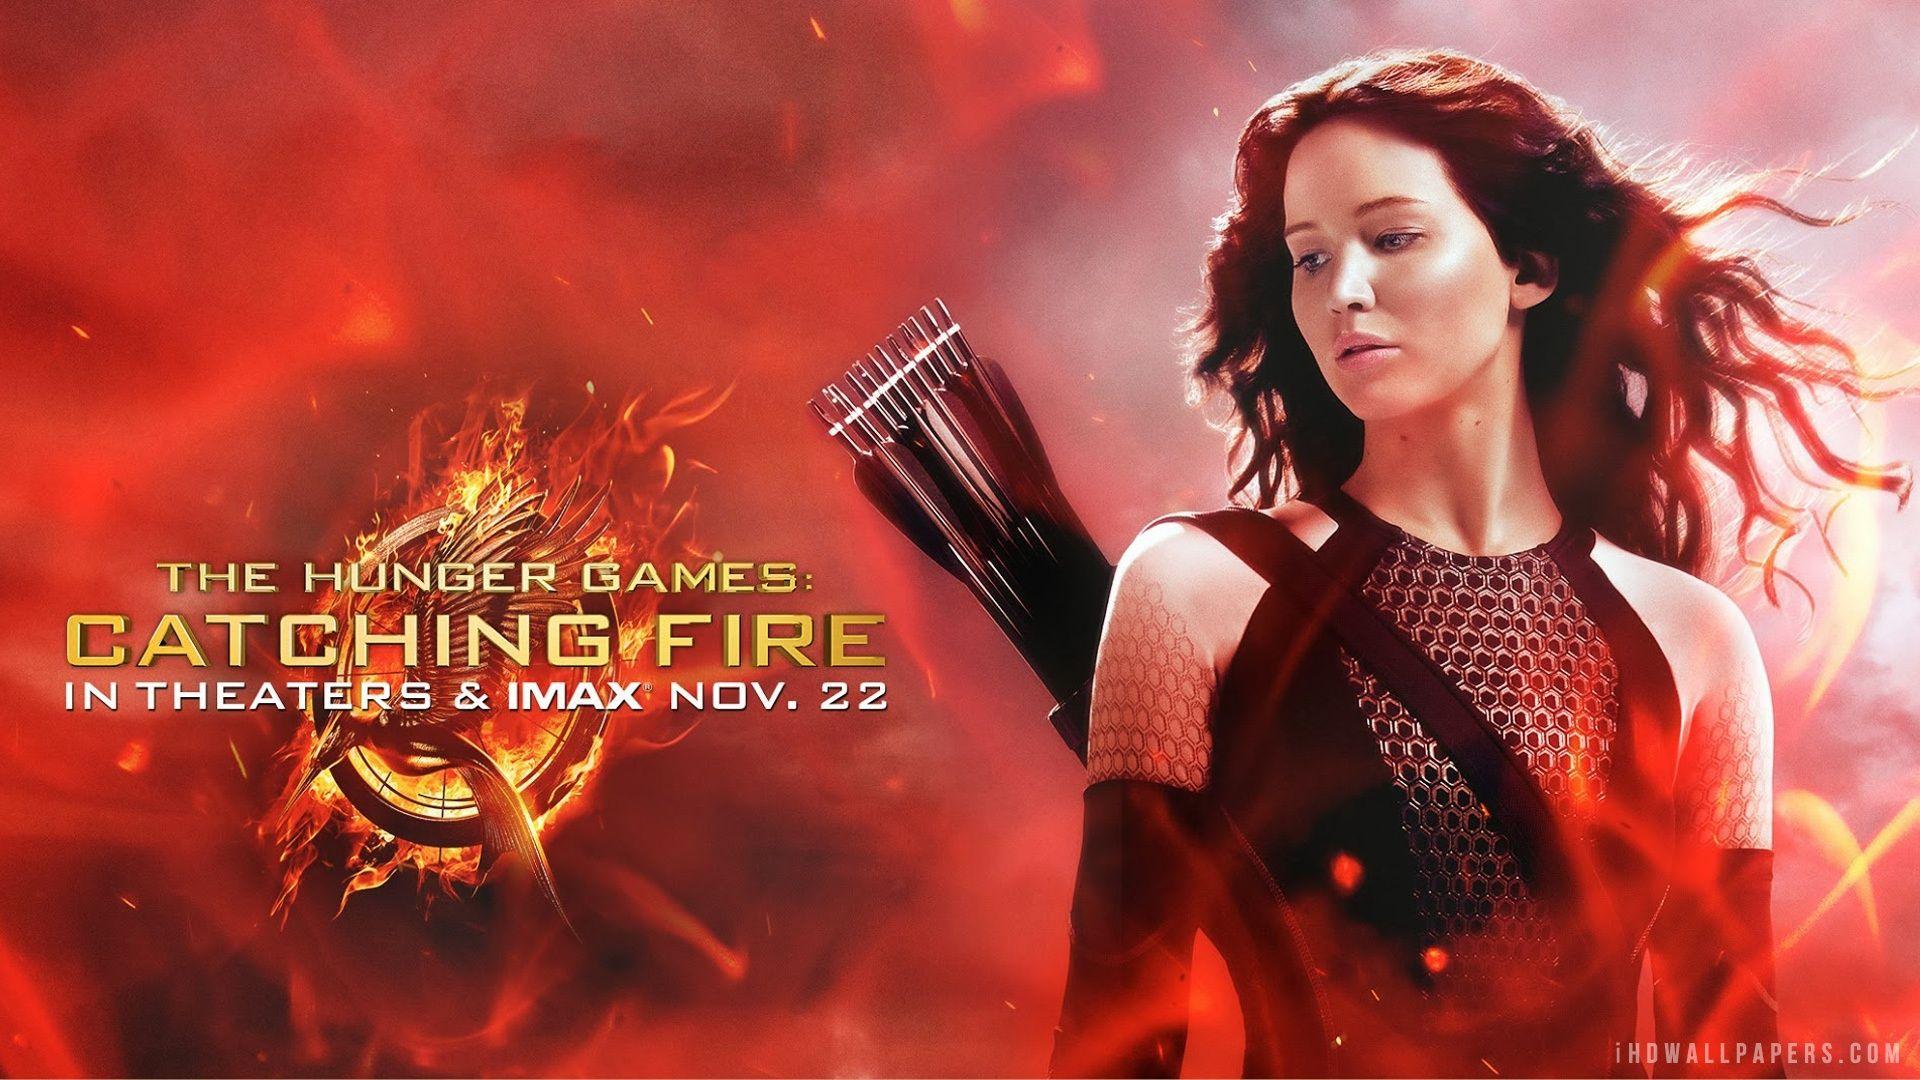 The Hunger Games: Catching Fire Wallpapers 12.